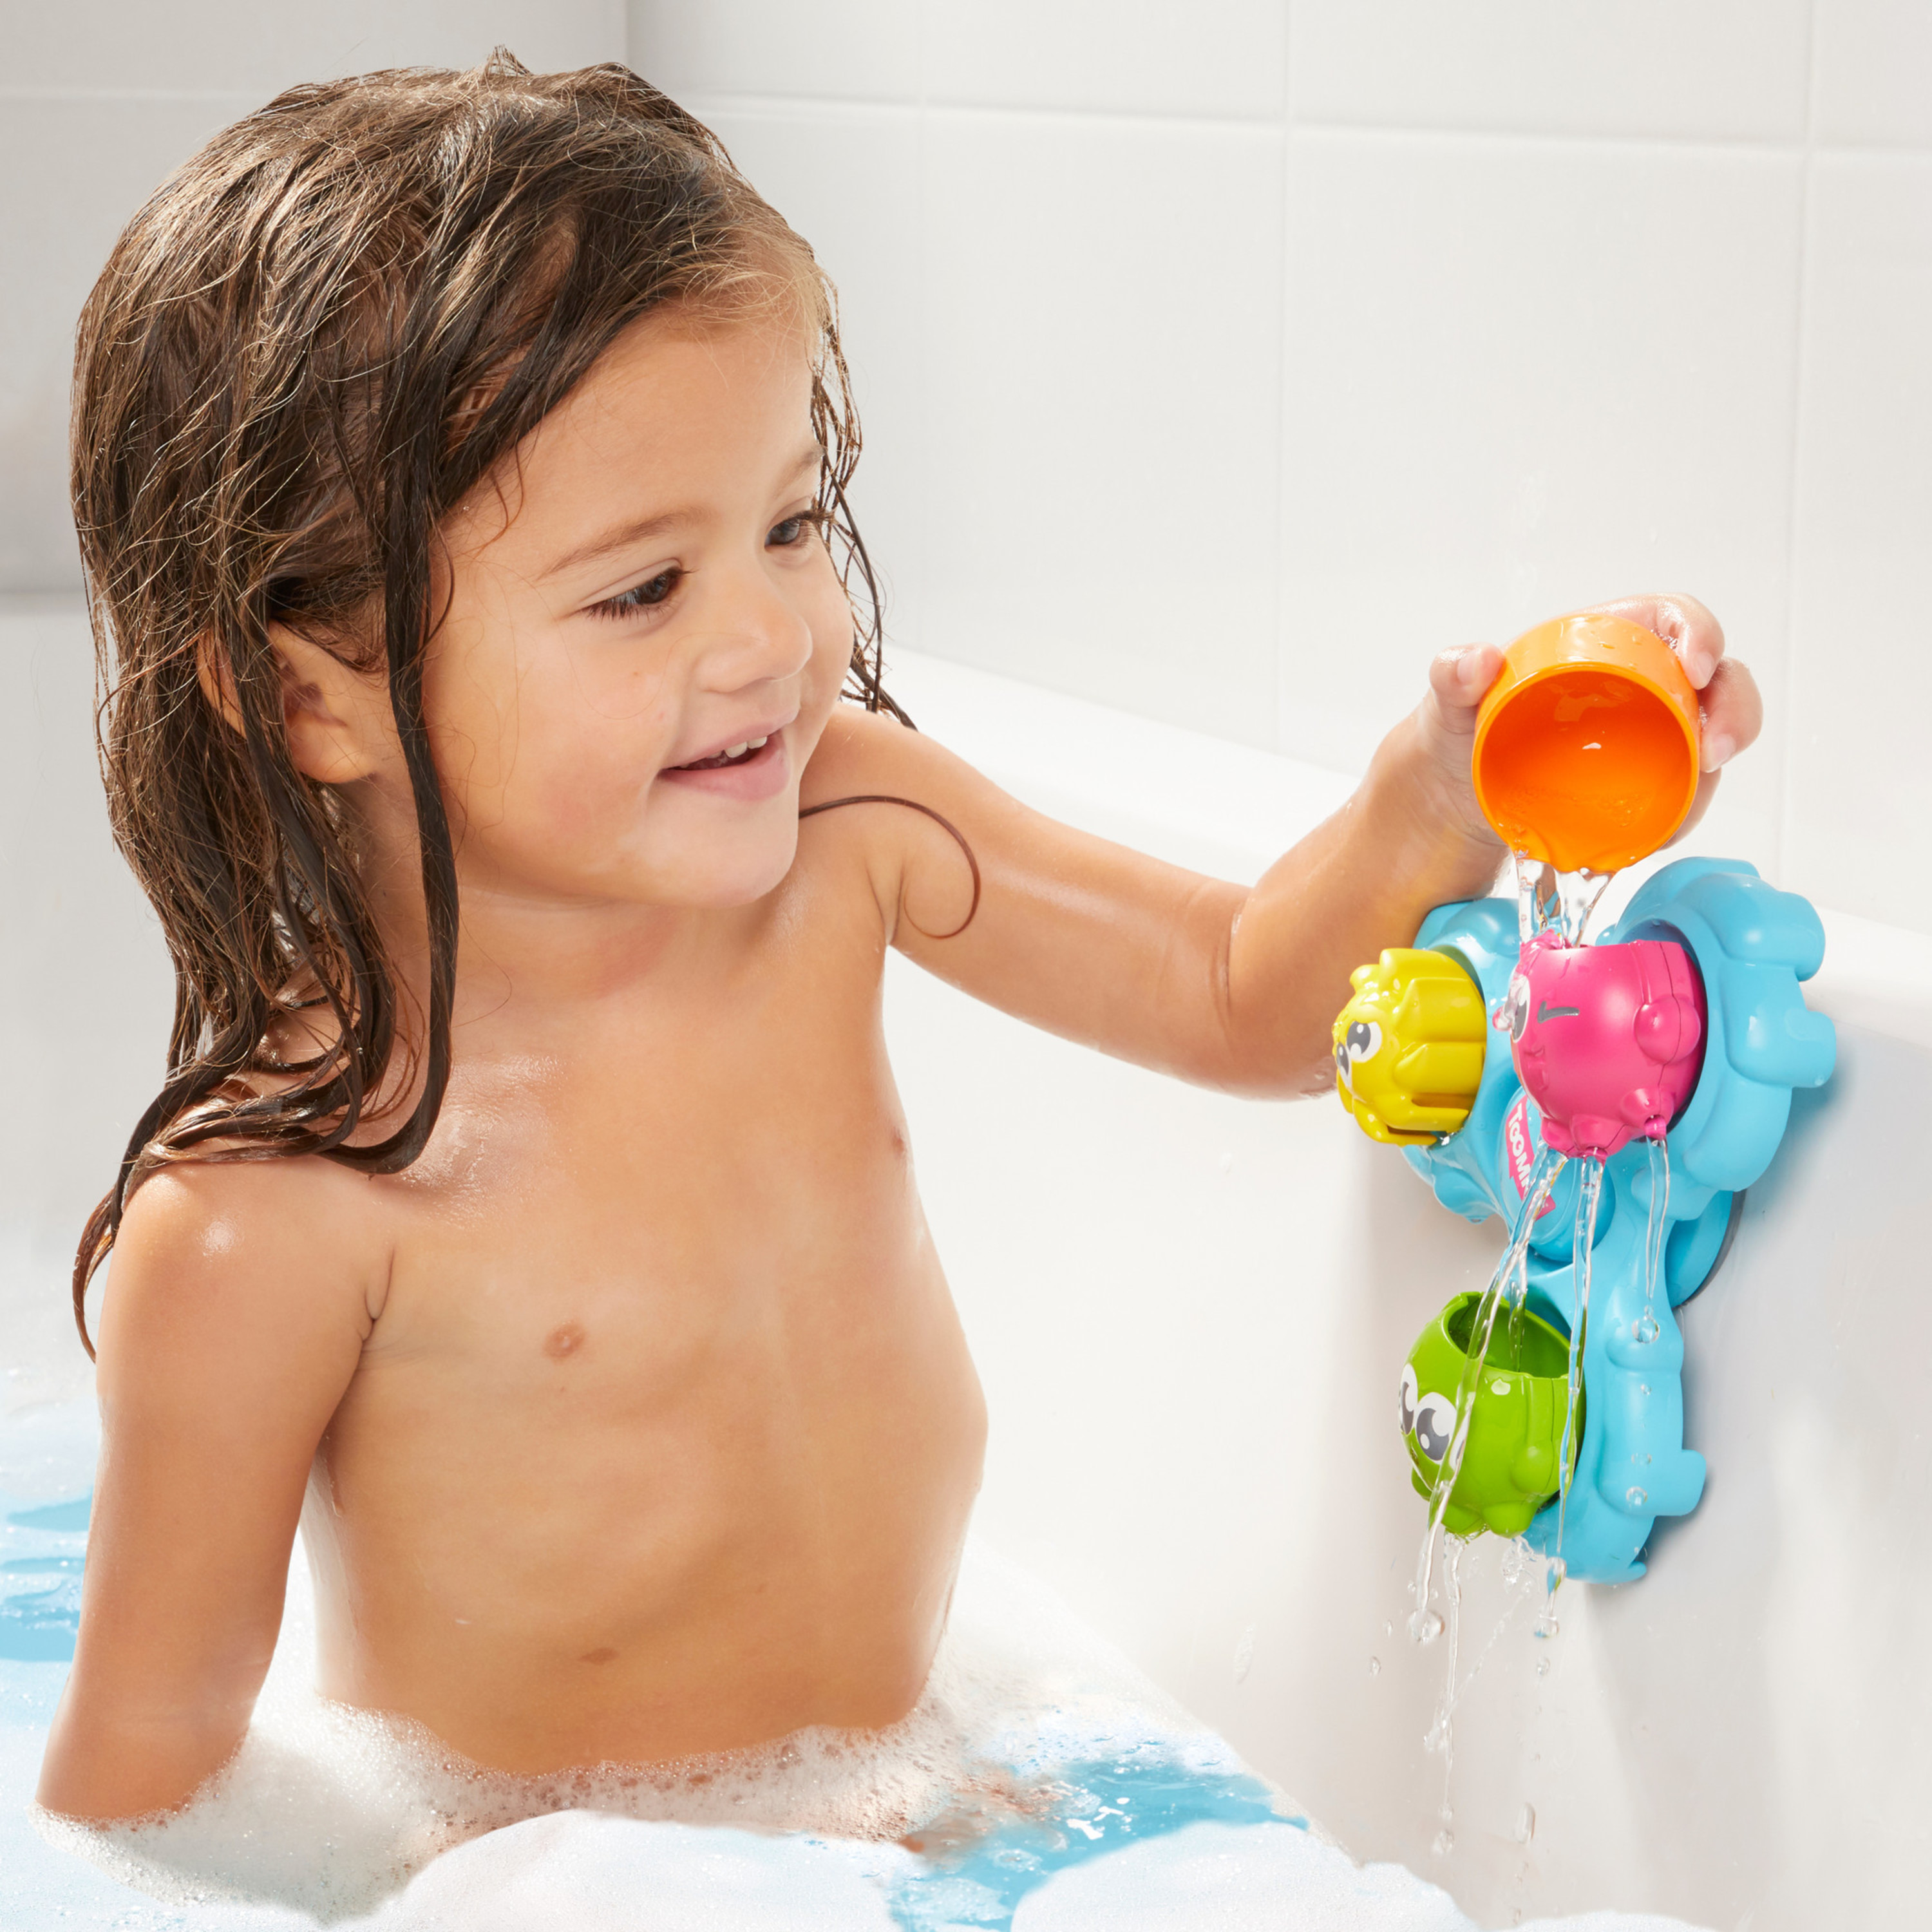 TOMY Toomies Spin And Splash Octopals Bath Toy, Colorful and Fun Toddler Bath Toys - image 5 of 6